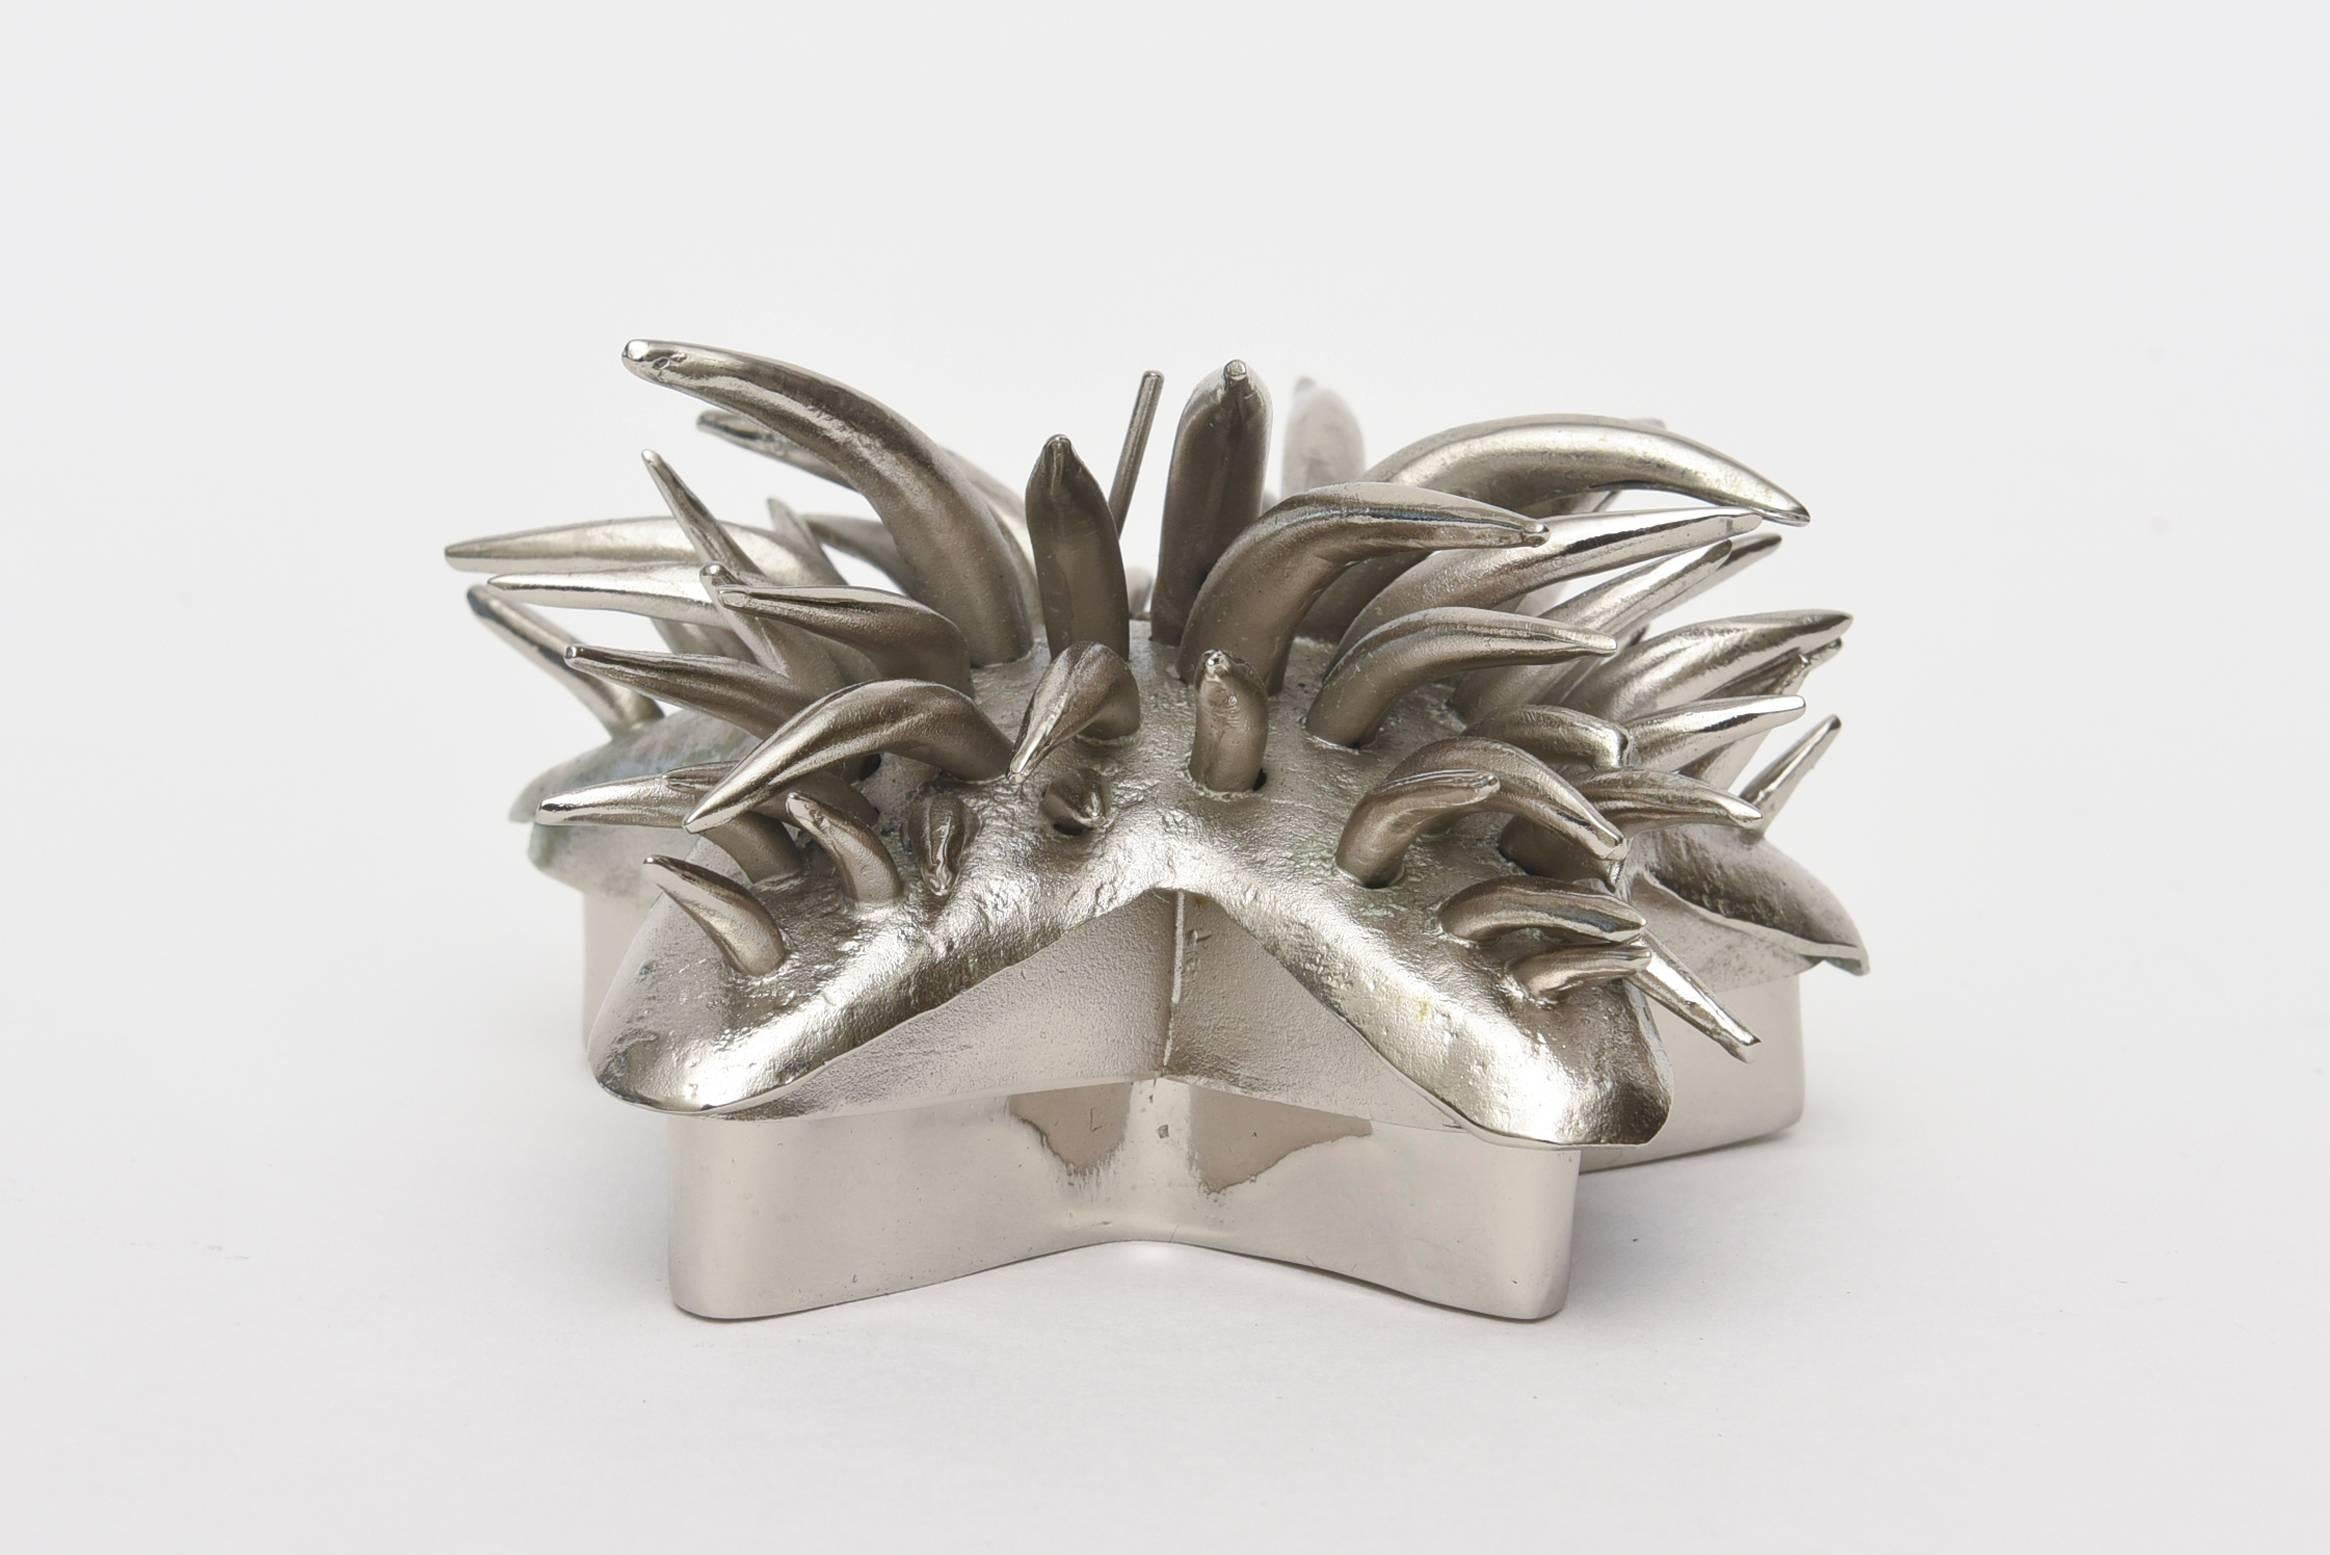 This interesting two-part box has been nickeled silver over white bronze on the top and nickel over blackened copper/ steel on the bottom. It is an abstract sea urchin top in starfish base form. Organic modern sculptural box/object. The tentacle